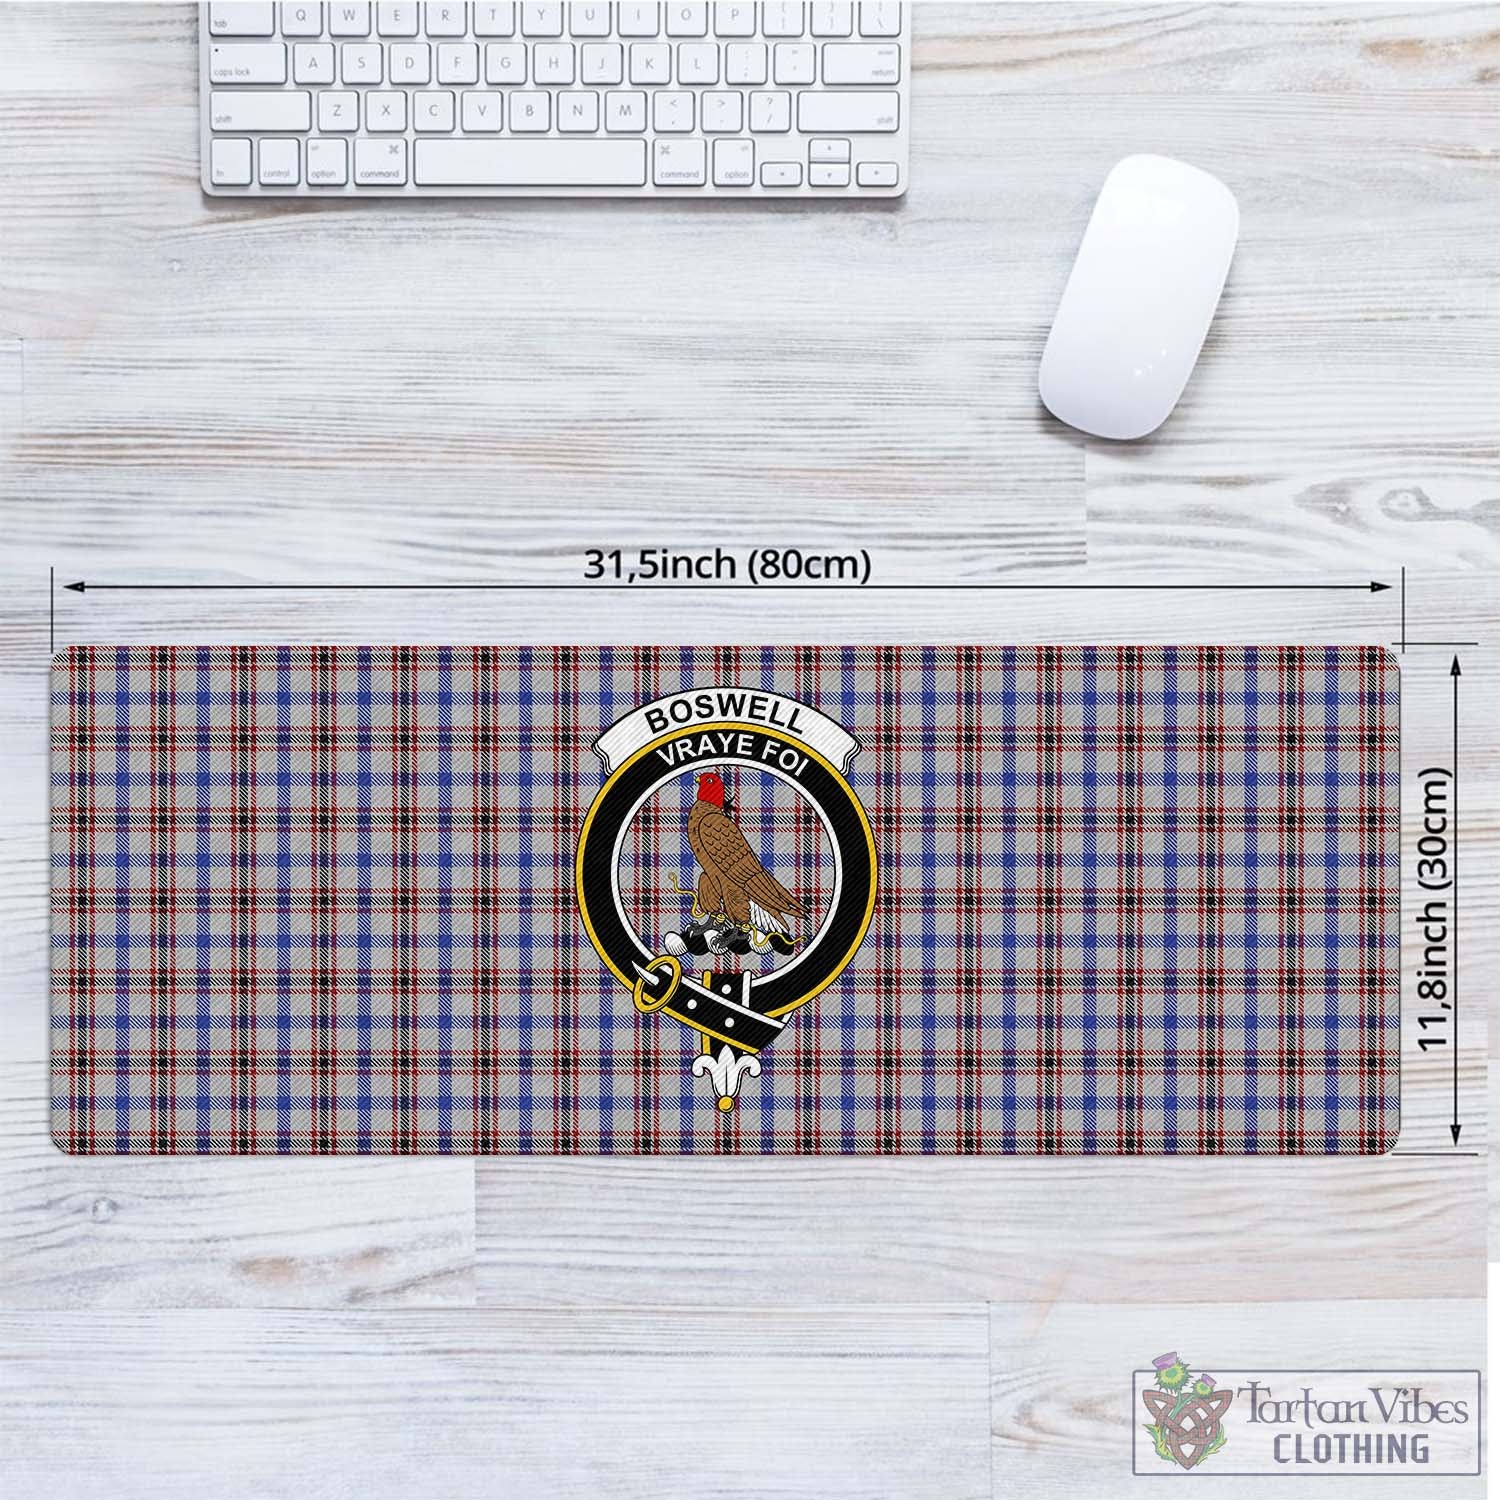 Tartan Vibes Clothing Boswell Tartan Mouse Pad with Family Crest